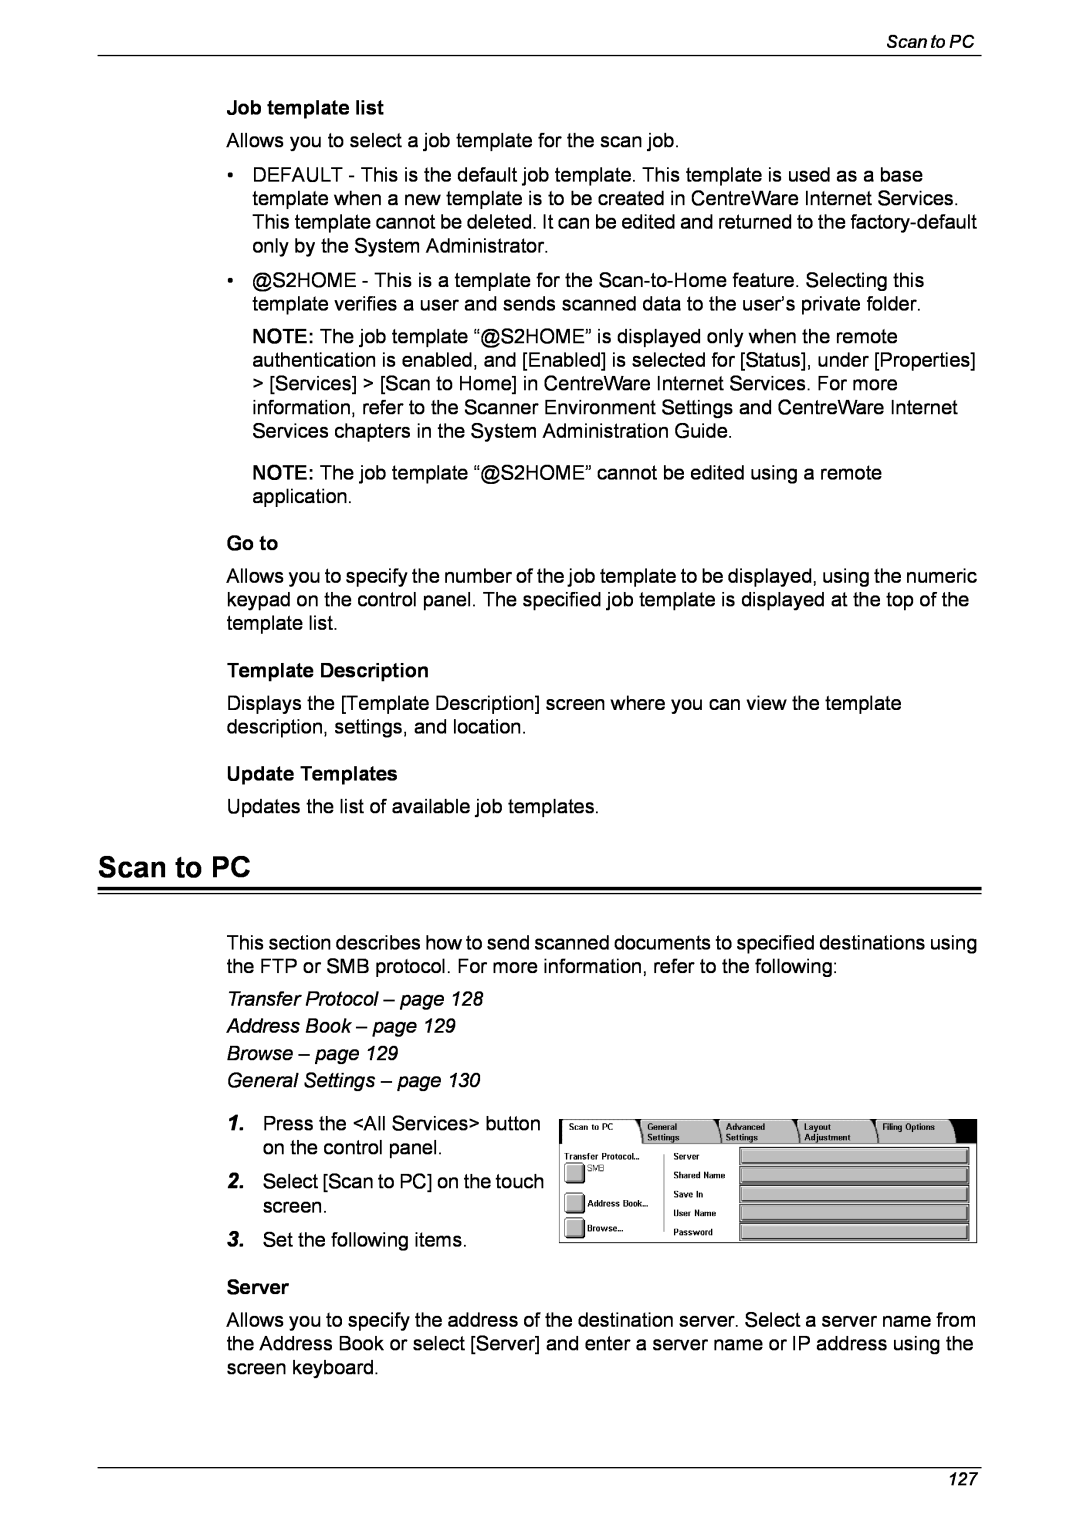 Xerox 5230 Scan to PC, Job template list, Template Description, Update Templates, Browse – page General Settings – page 